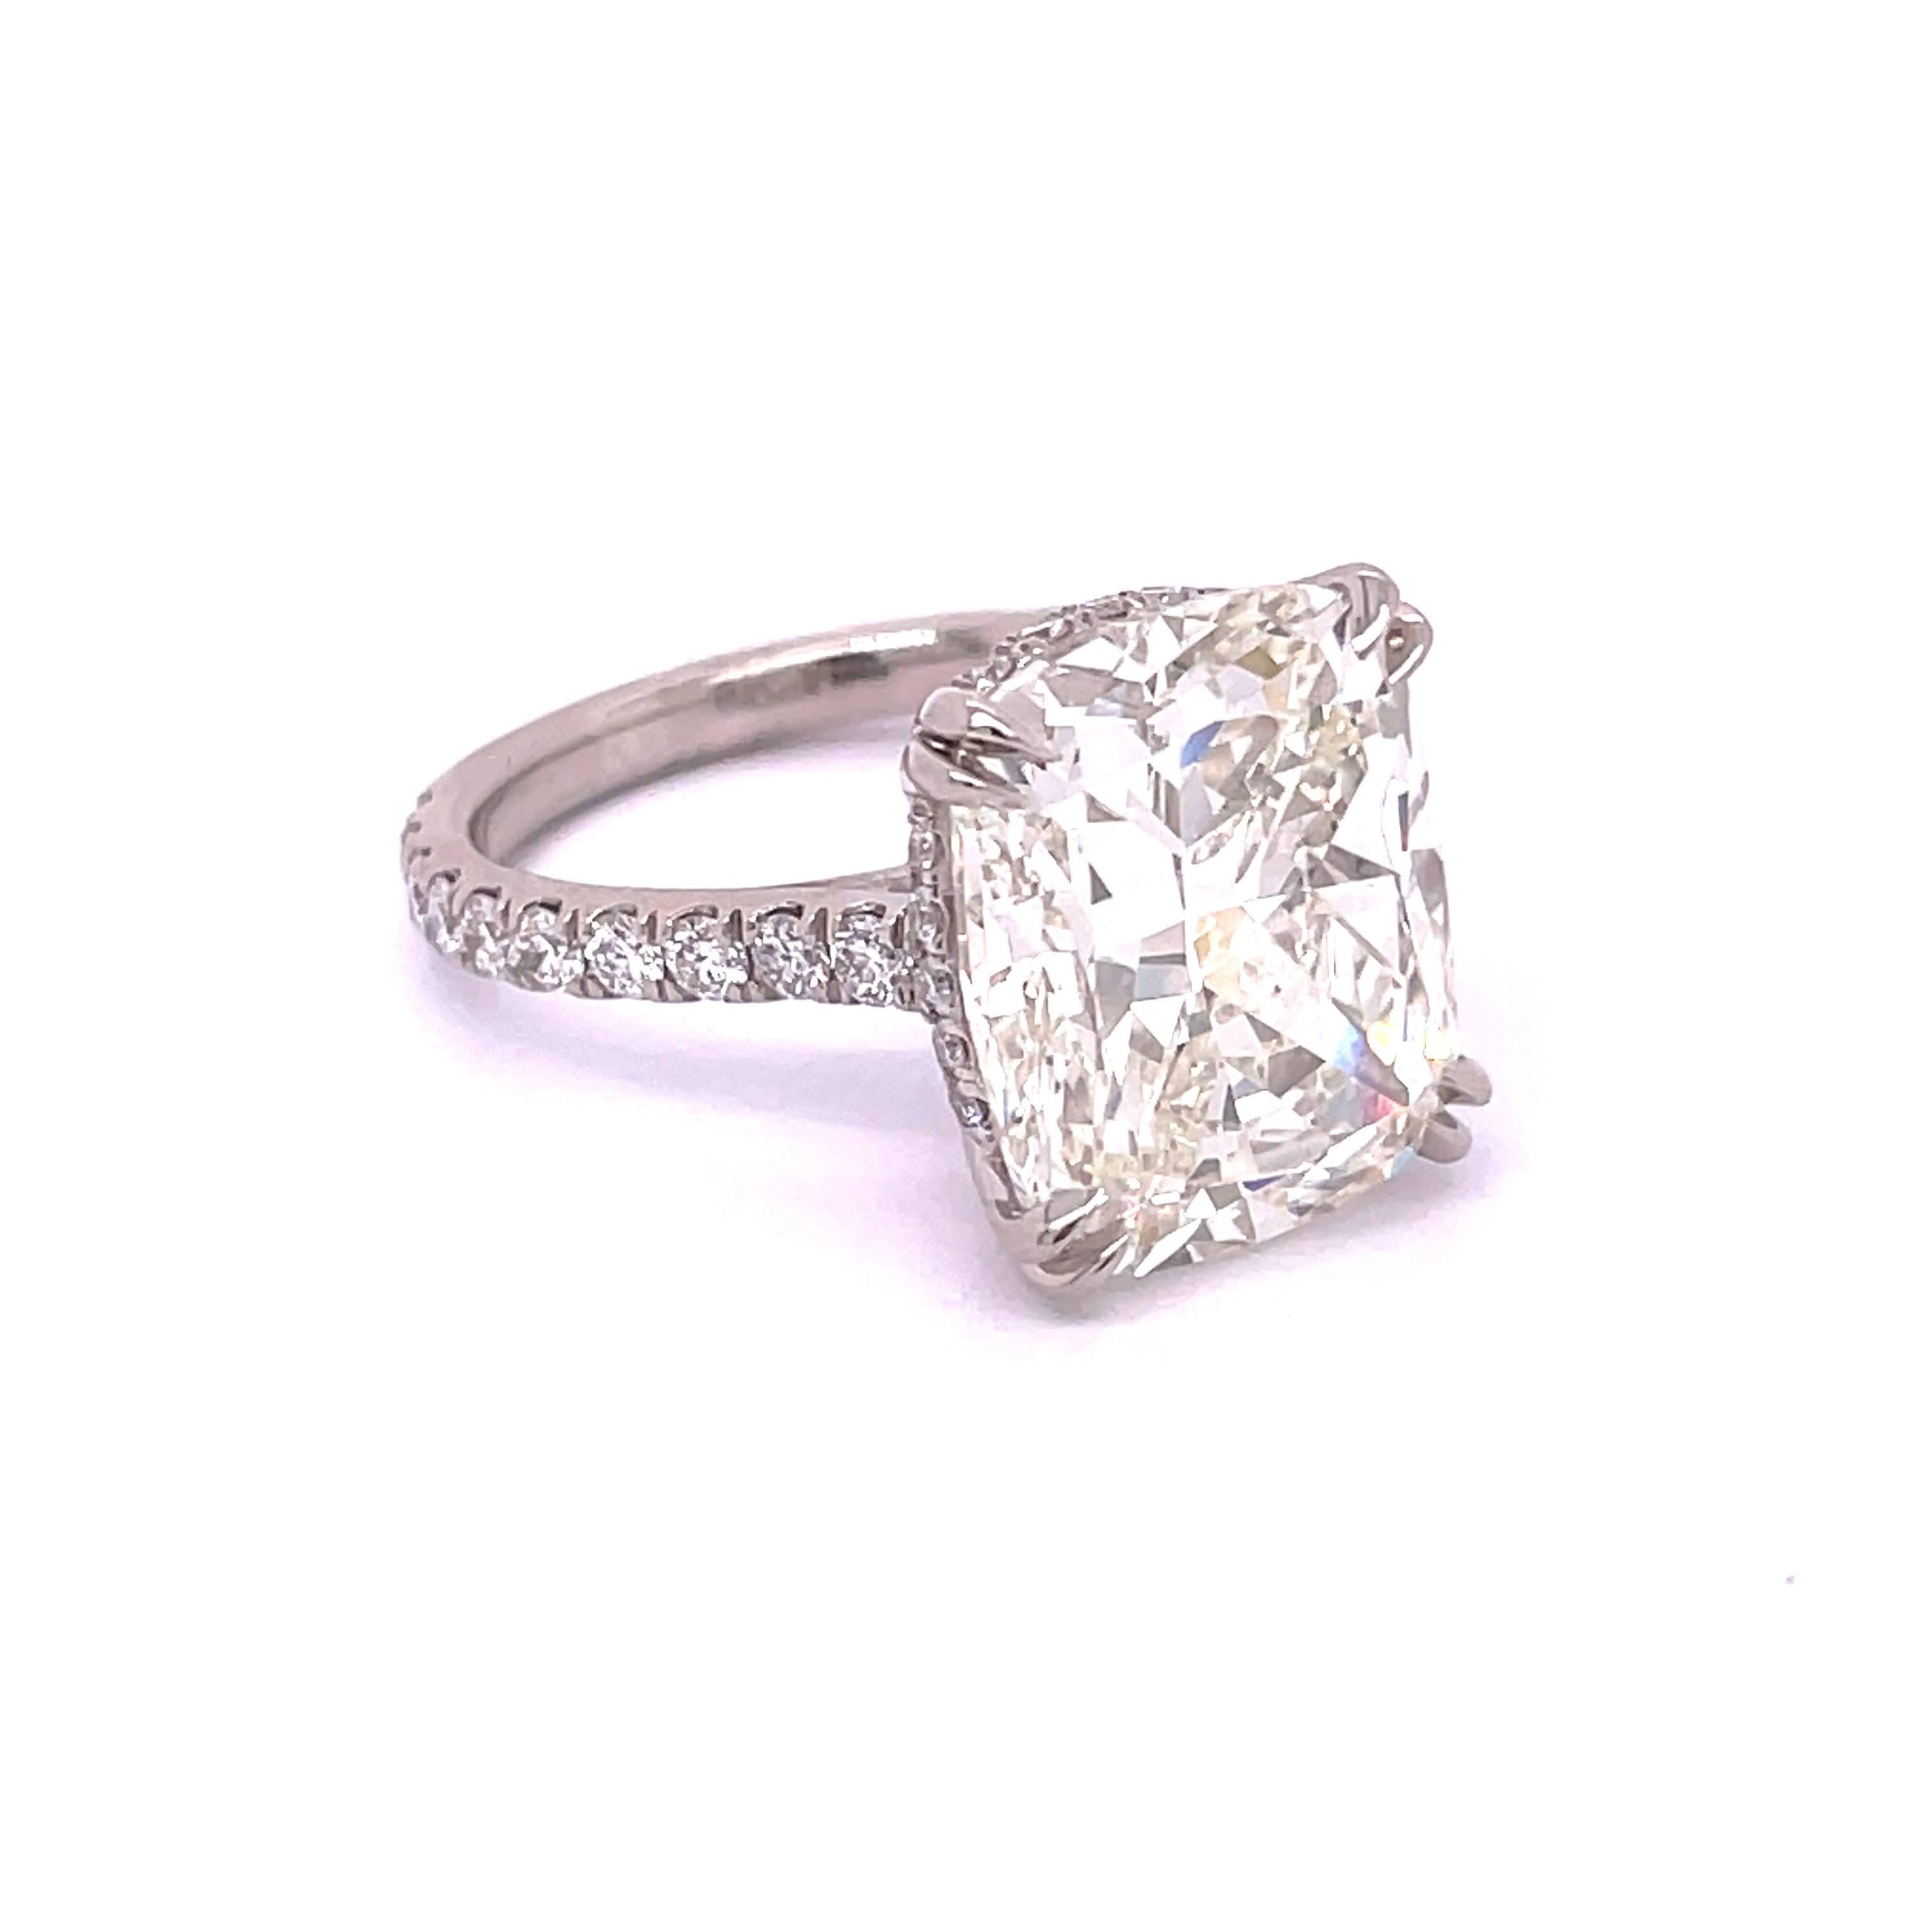 GIA Certified Cushion Shape Cut Diamond 8.58, J Color VS2 Clarity lays on a beautiful Platinum mounting with claw prongs holding it. Also, adding 0.86 carat round diamonds on to the shank blended with the brilliance of the center stone. Made to